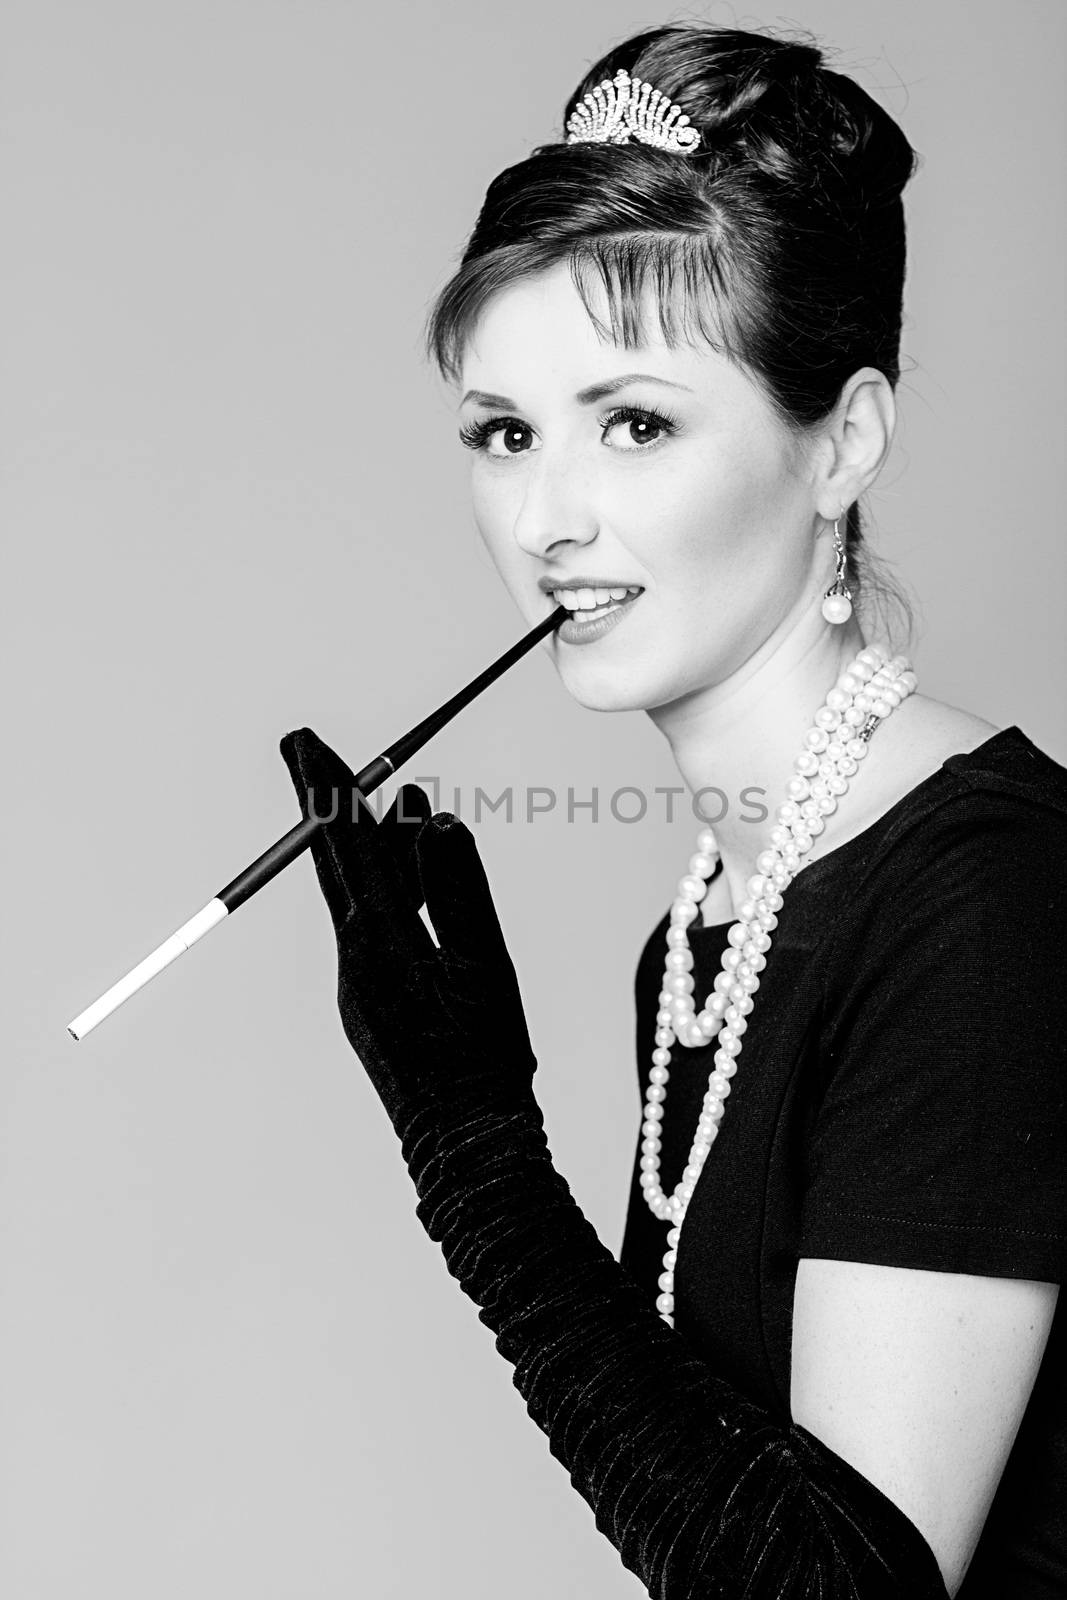 Portrait of a beautiful young woman in retro style with cigarette in mouthpiece in the image of the famous actress Audrey Hepburn. Black and white photography